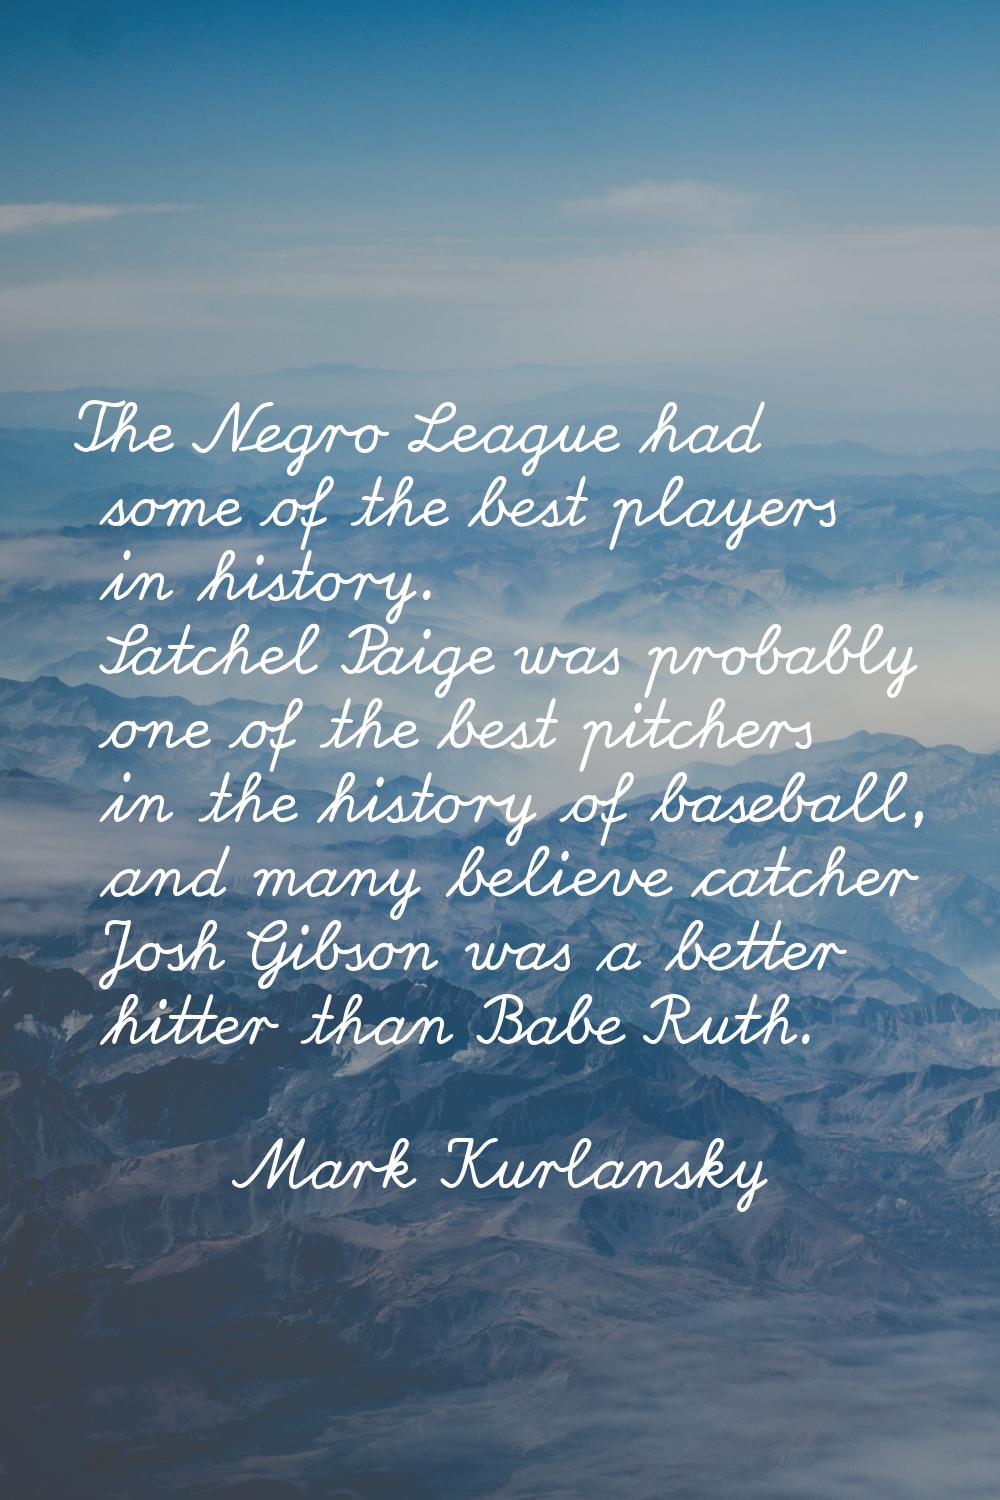 The Negro League had some of the best players in history. Satchel Paige was probably one of the bes